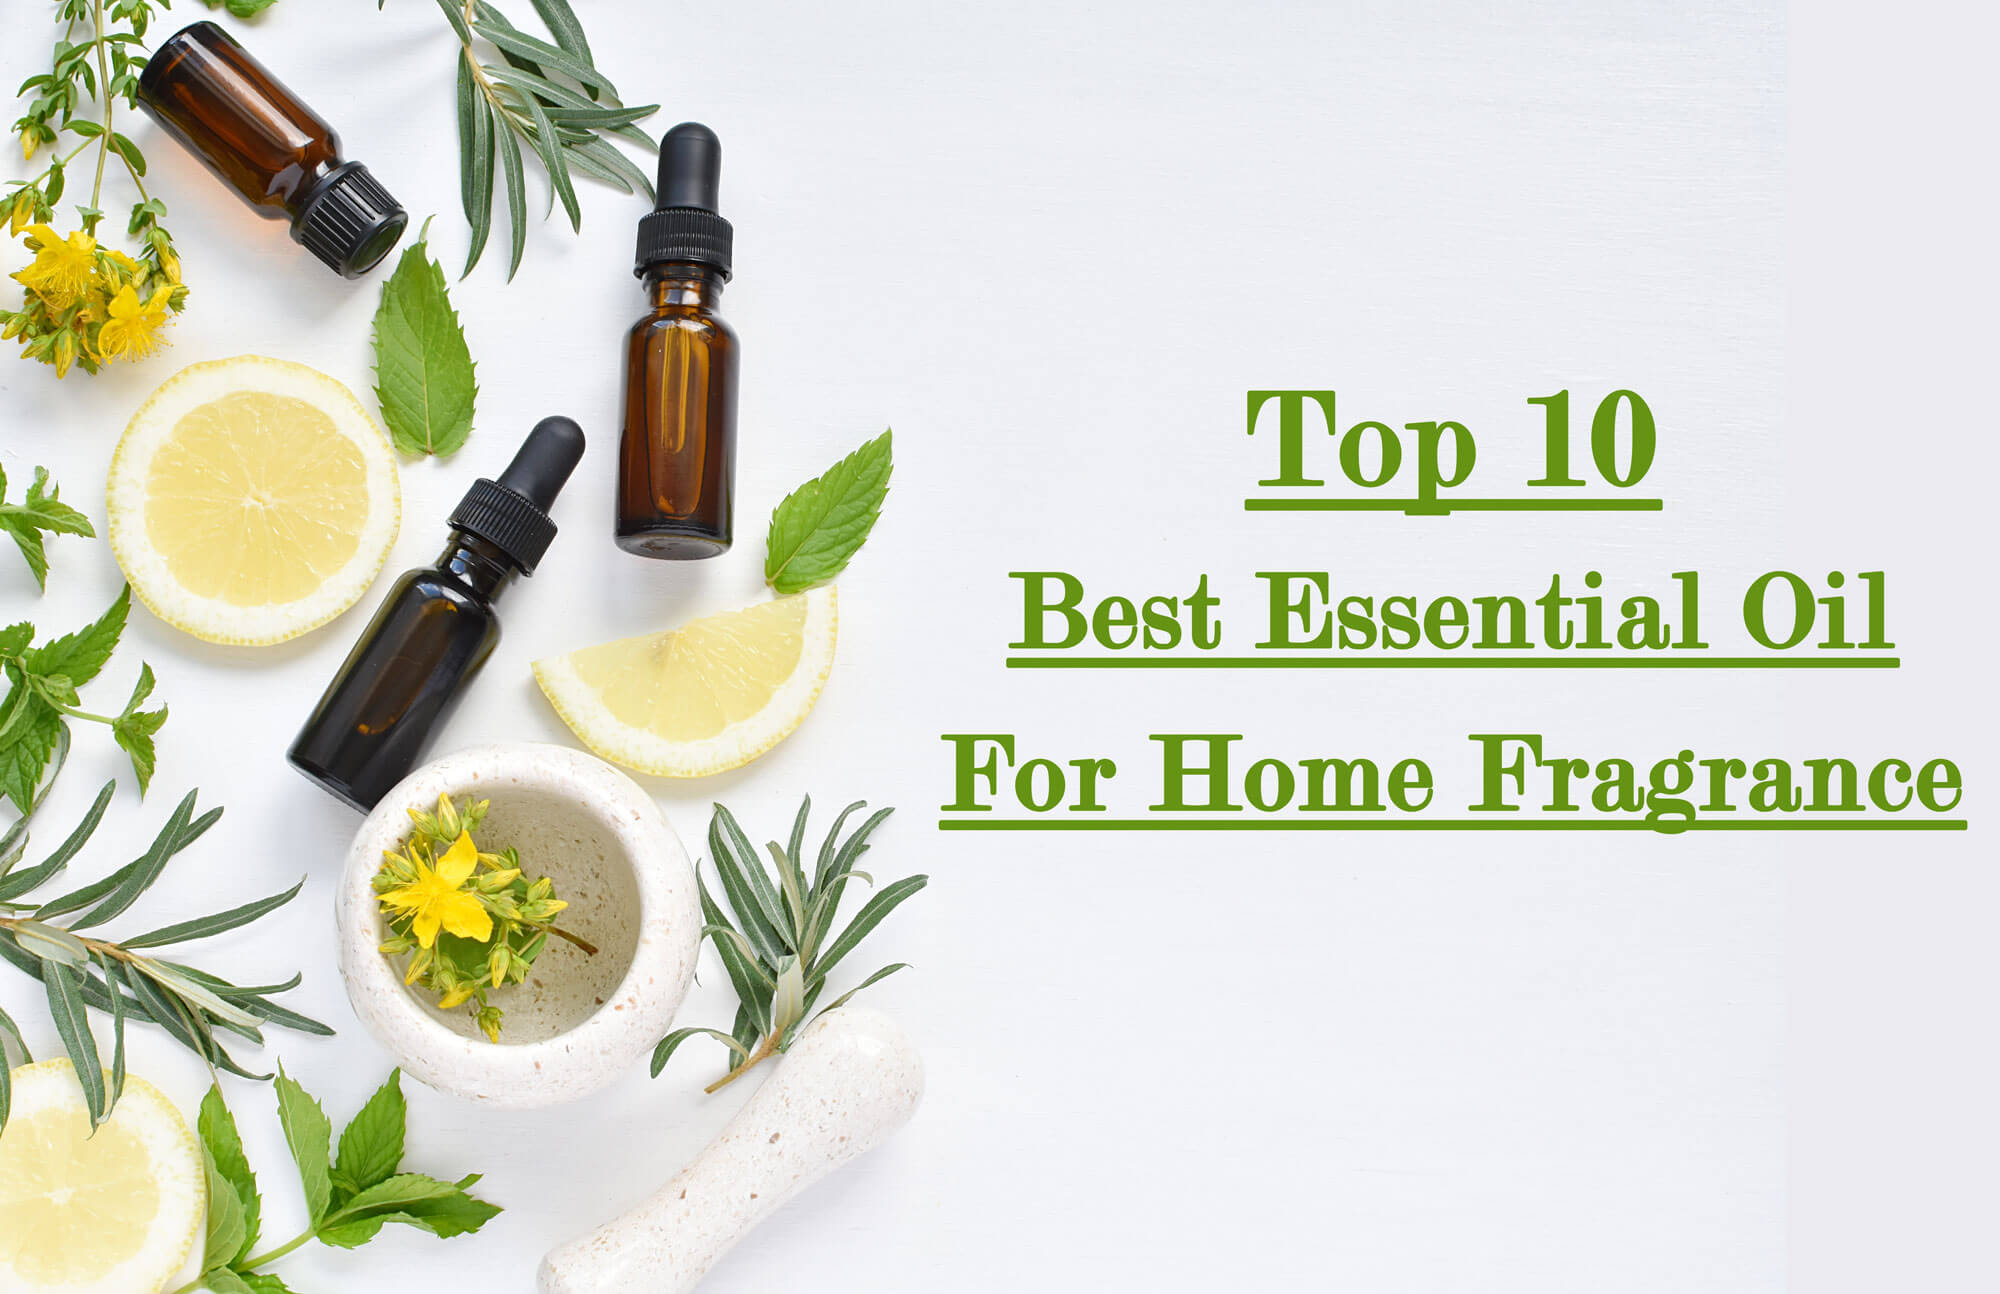 The Best Smelling Essential Oils for Homes